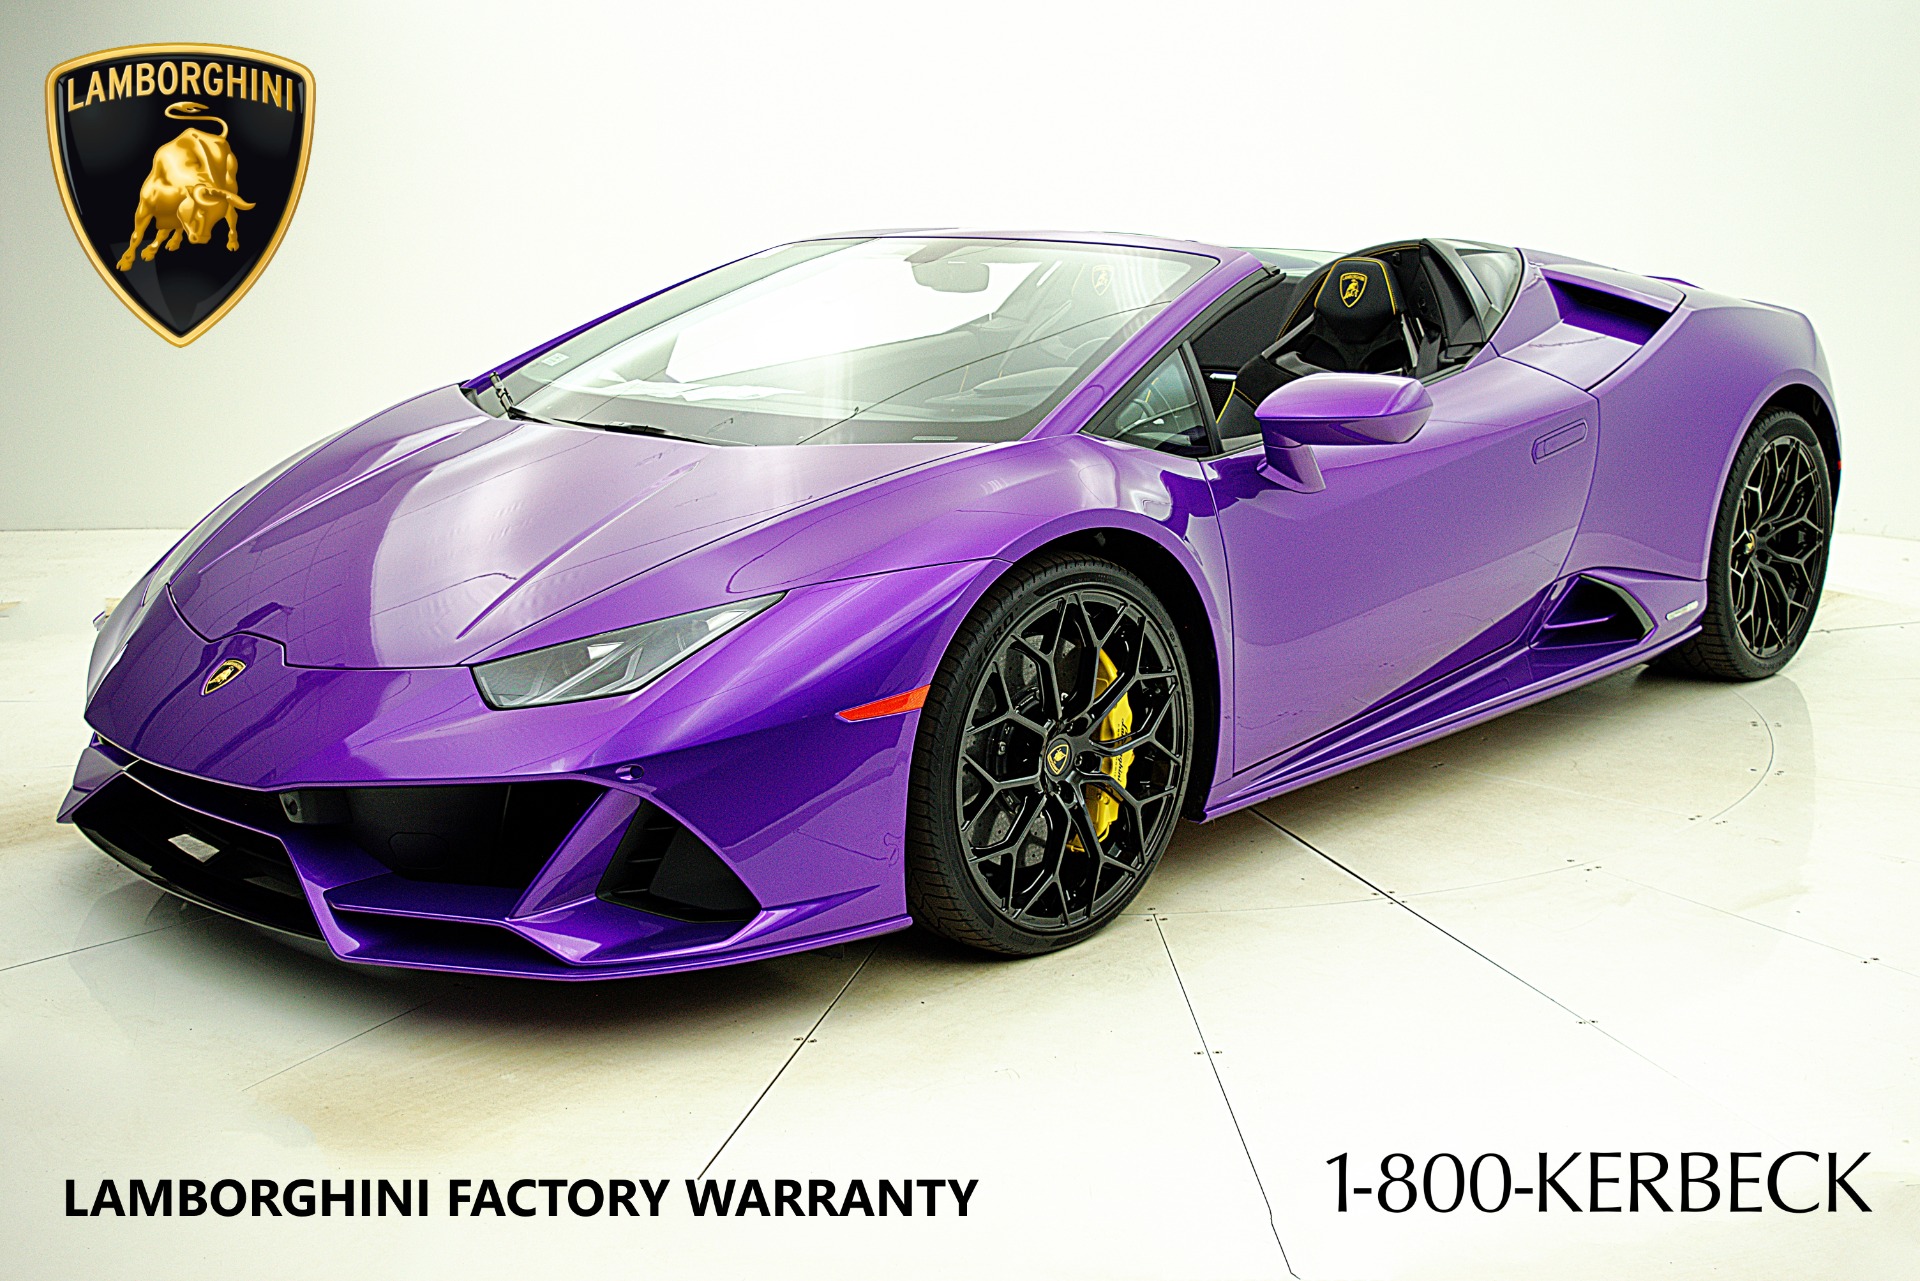 Used 2022 Lamborghini Huracan LP 640-4 EVO Spyder AWD / LEASE OPTIONS AVAILABLE for sale Sold at Bentley Palmyra N.J. in Palmyra NJ 08065 2